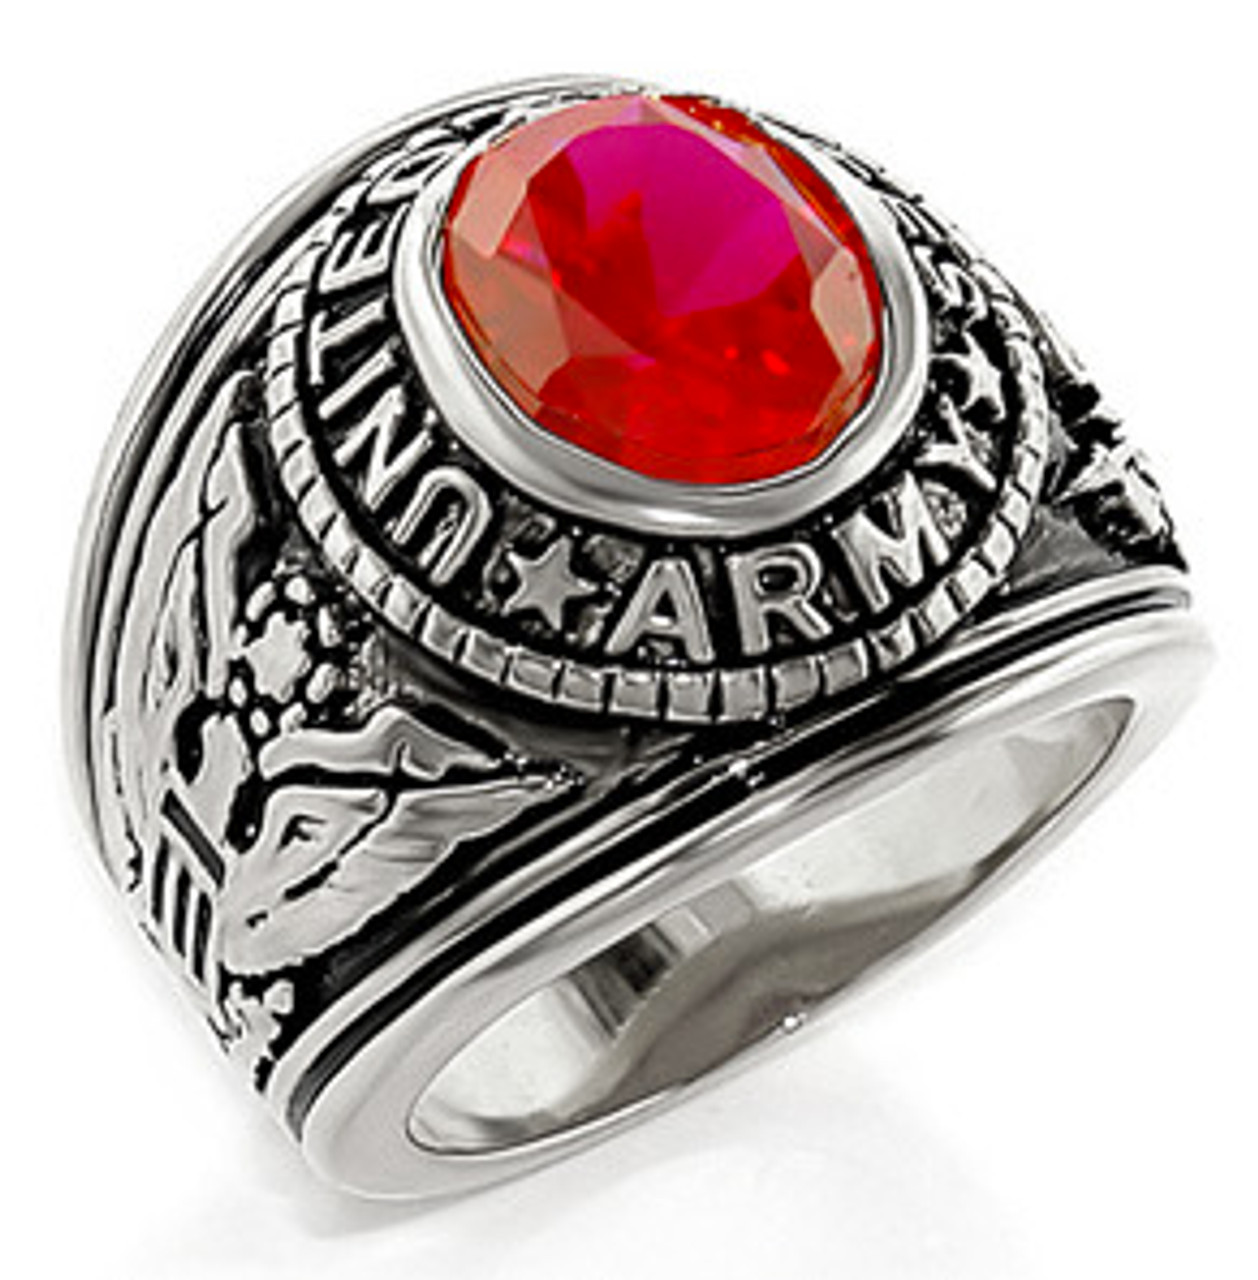 Army - U.S. Armed Forces Military Ring. silver and red